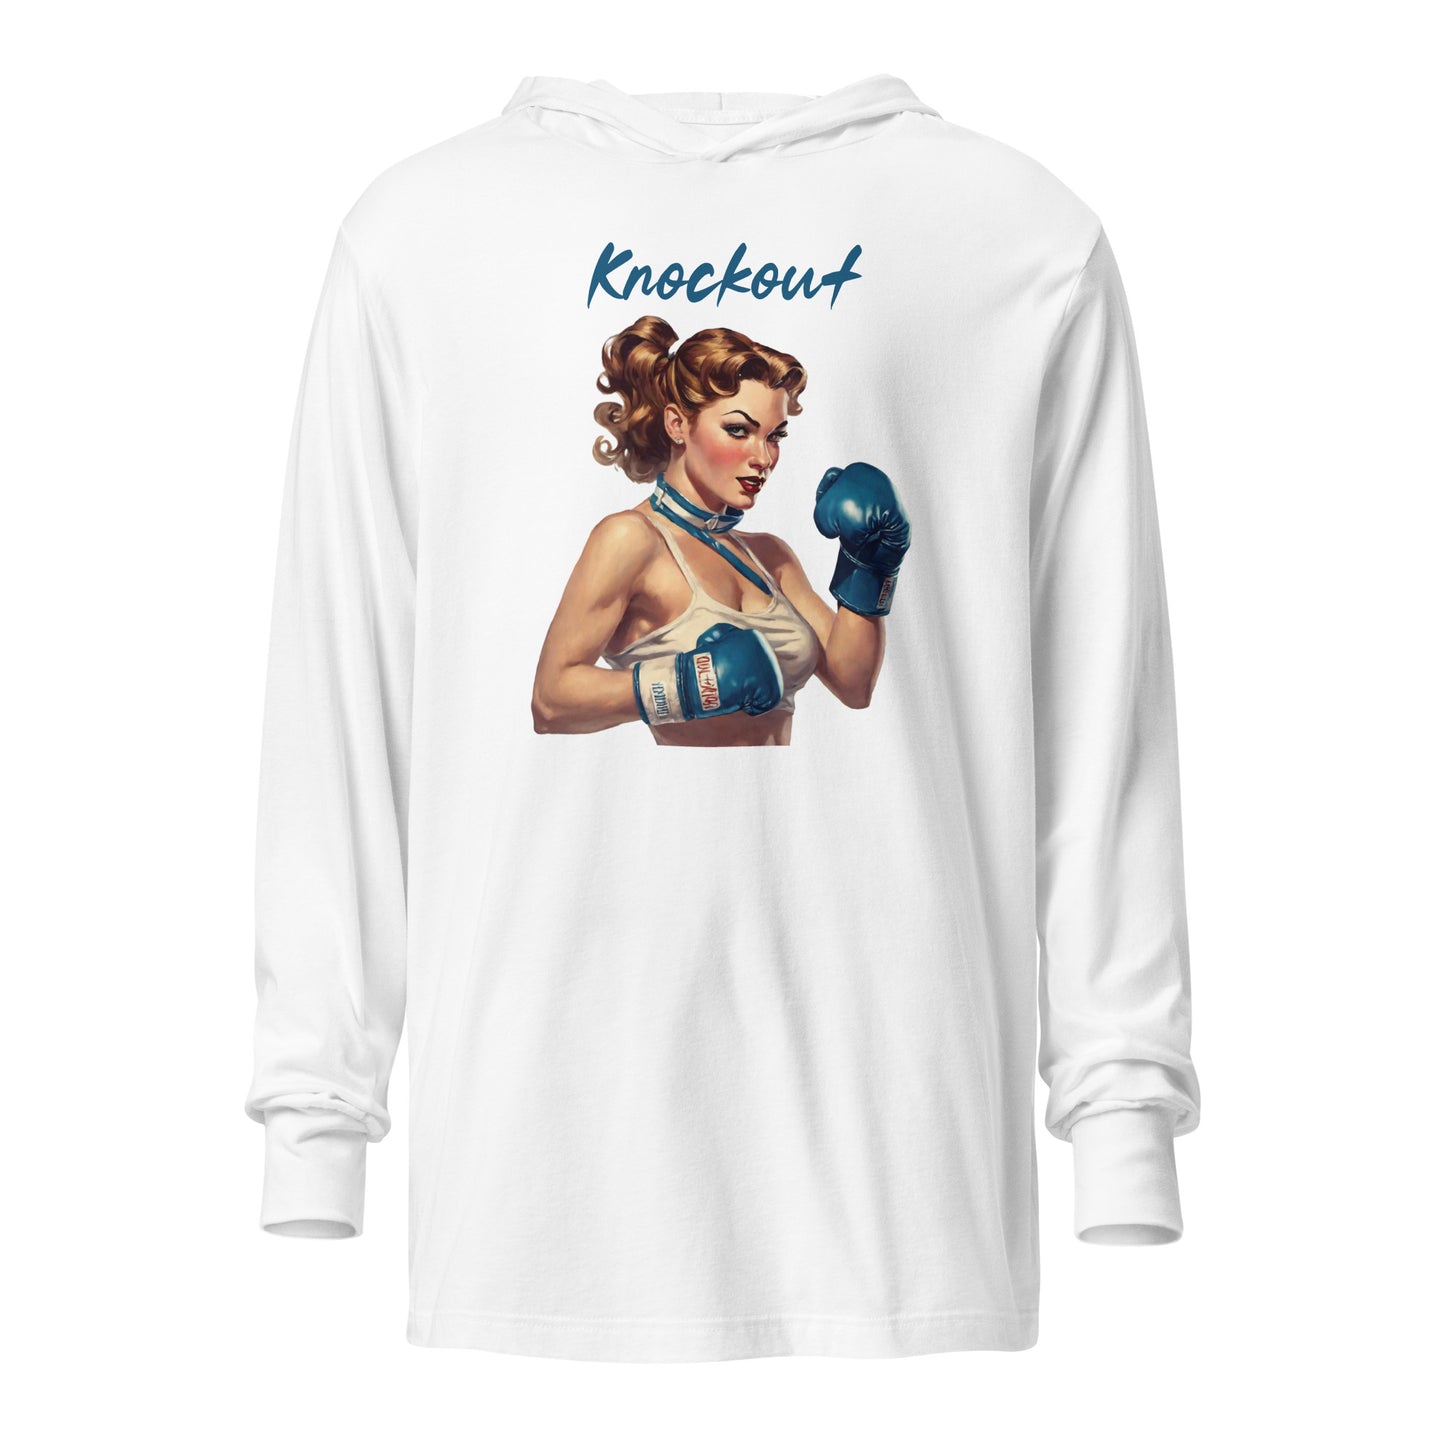 Knockout Women's Hooded Long-Sleeve Tee White